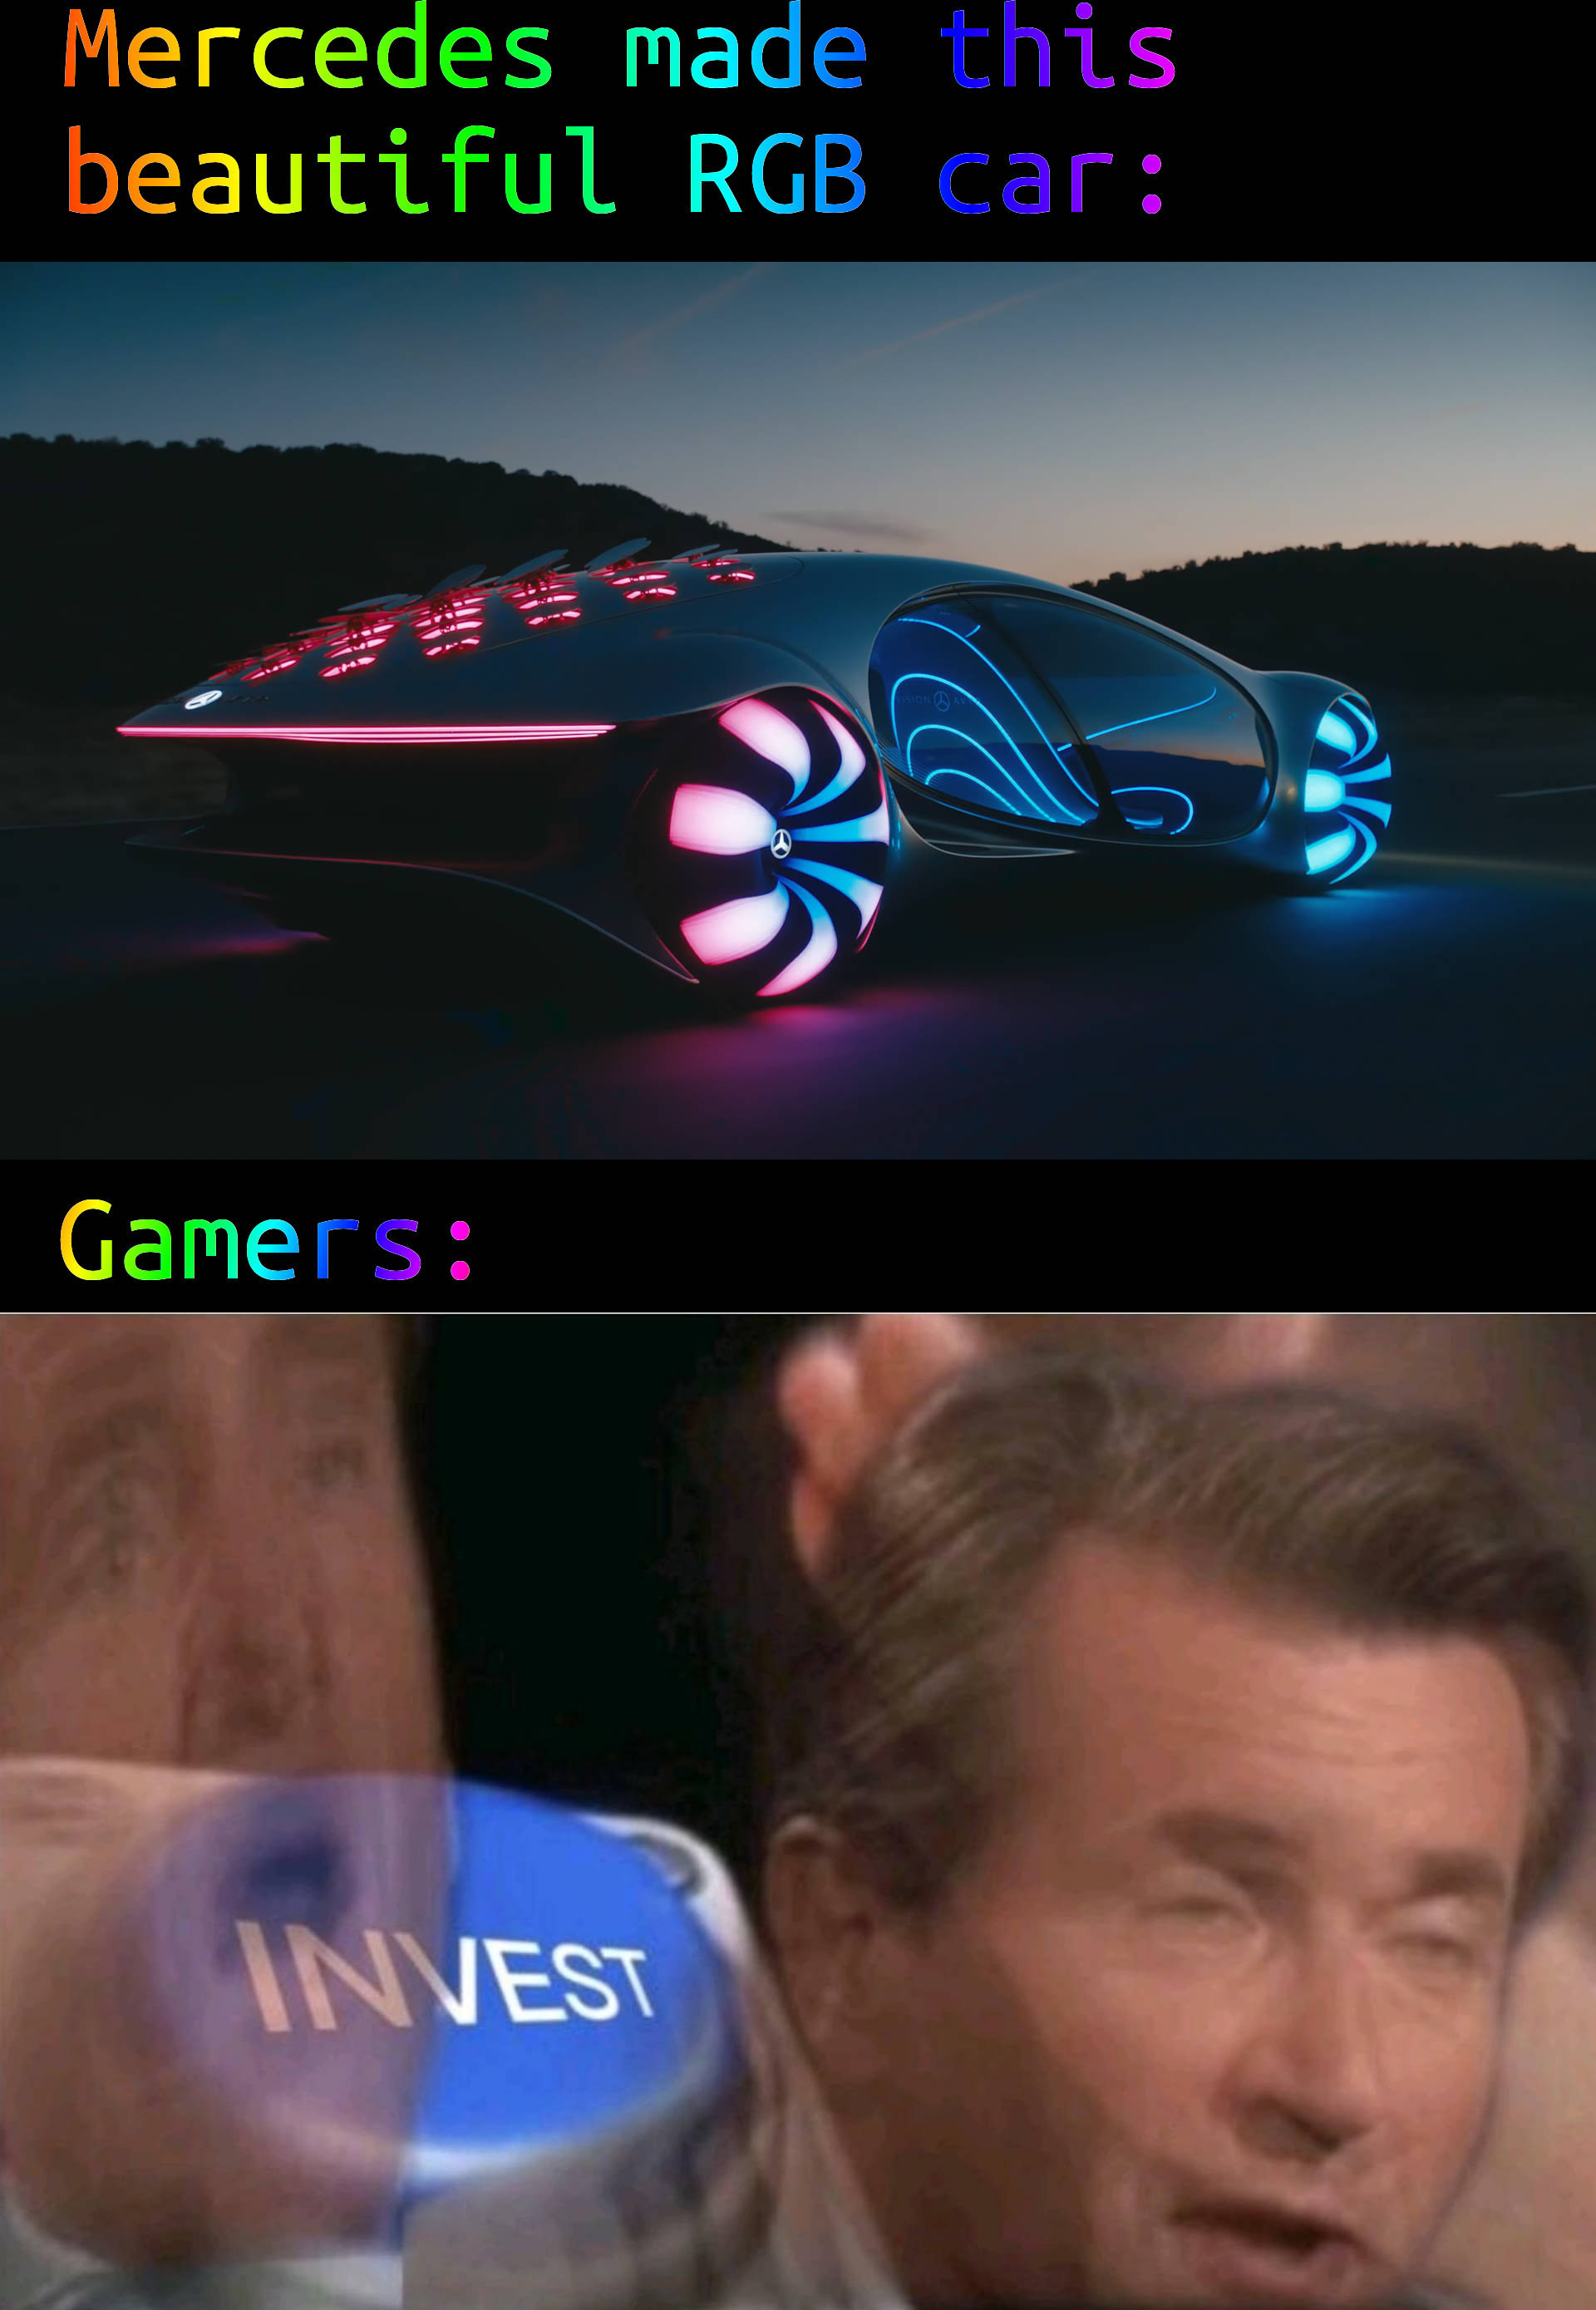 dank memes - invest meme - Mercedes made this beautiful Rgb car Gamers Invest